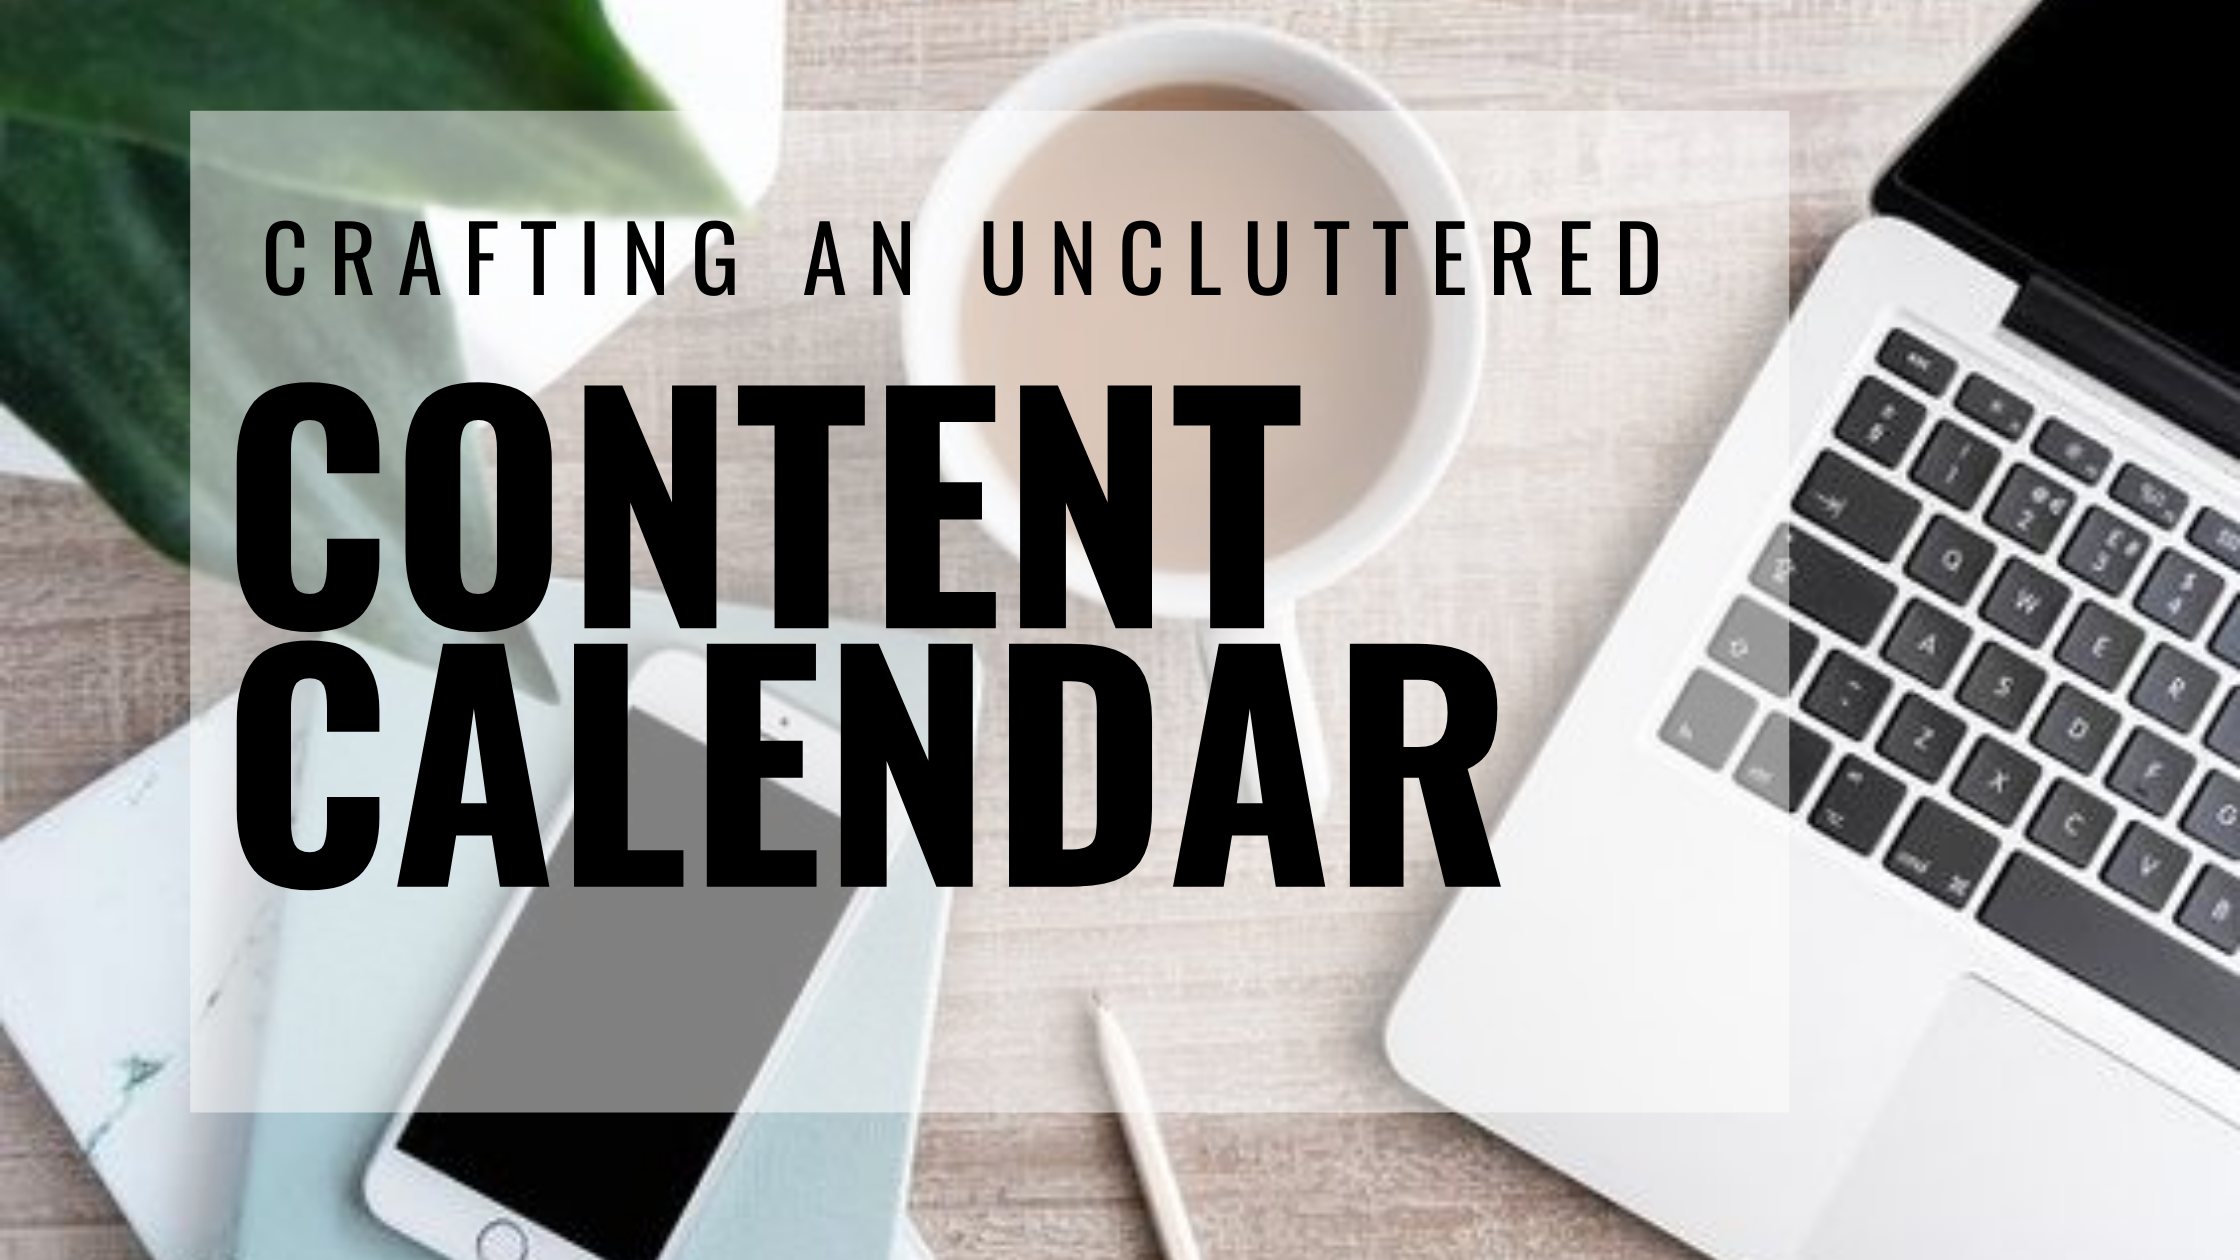 Content Marketing Calendar: The Right Way to Do It